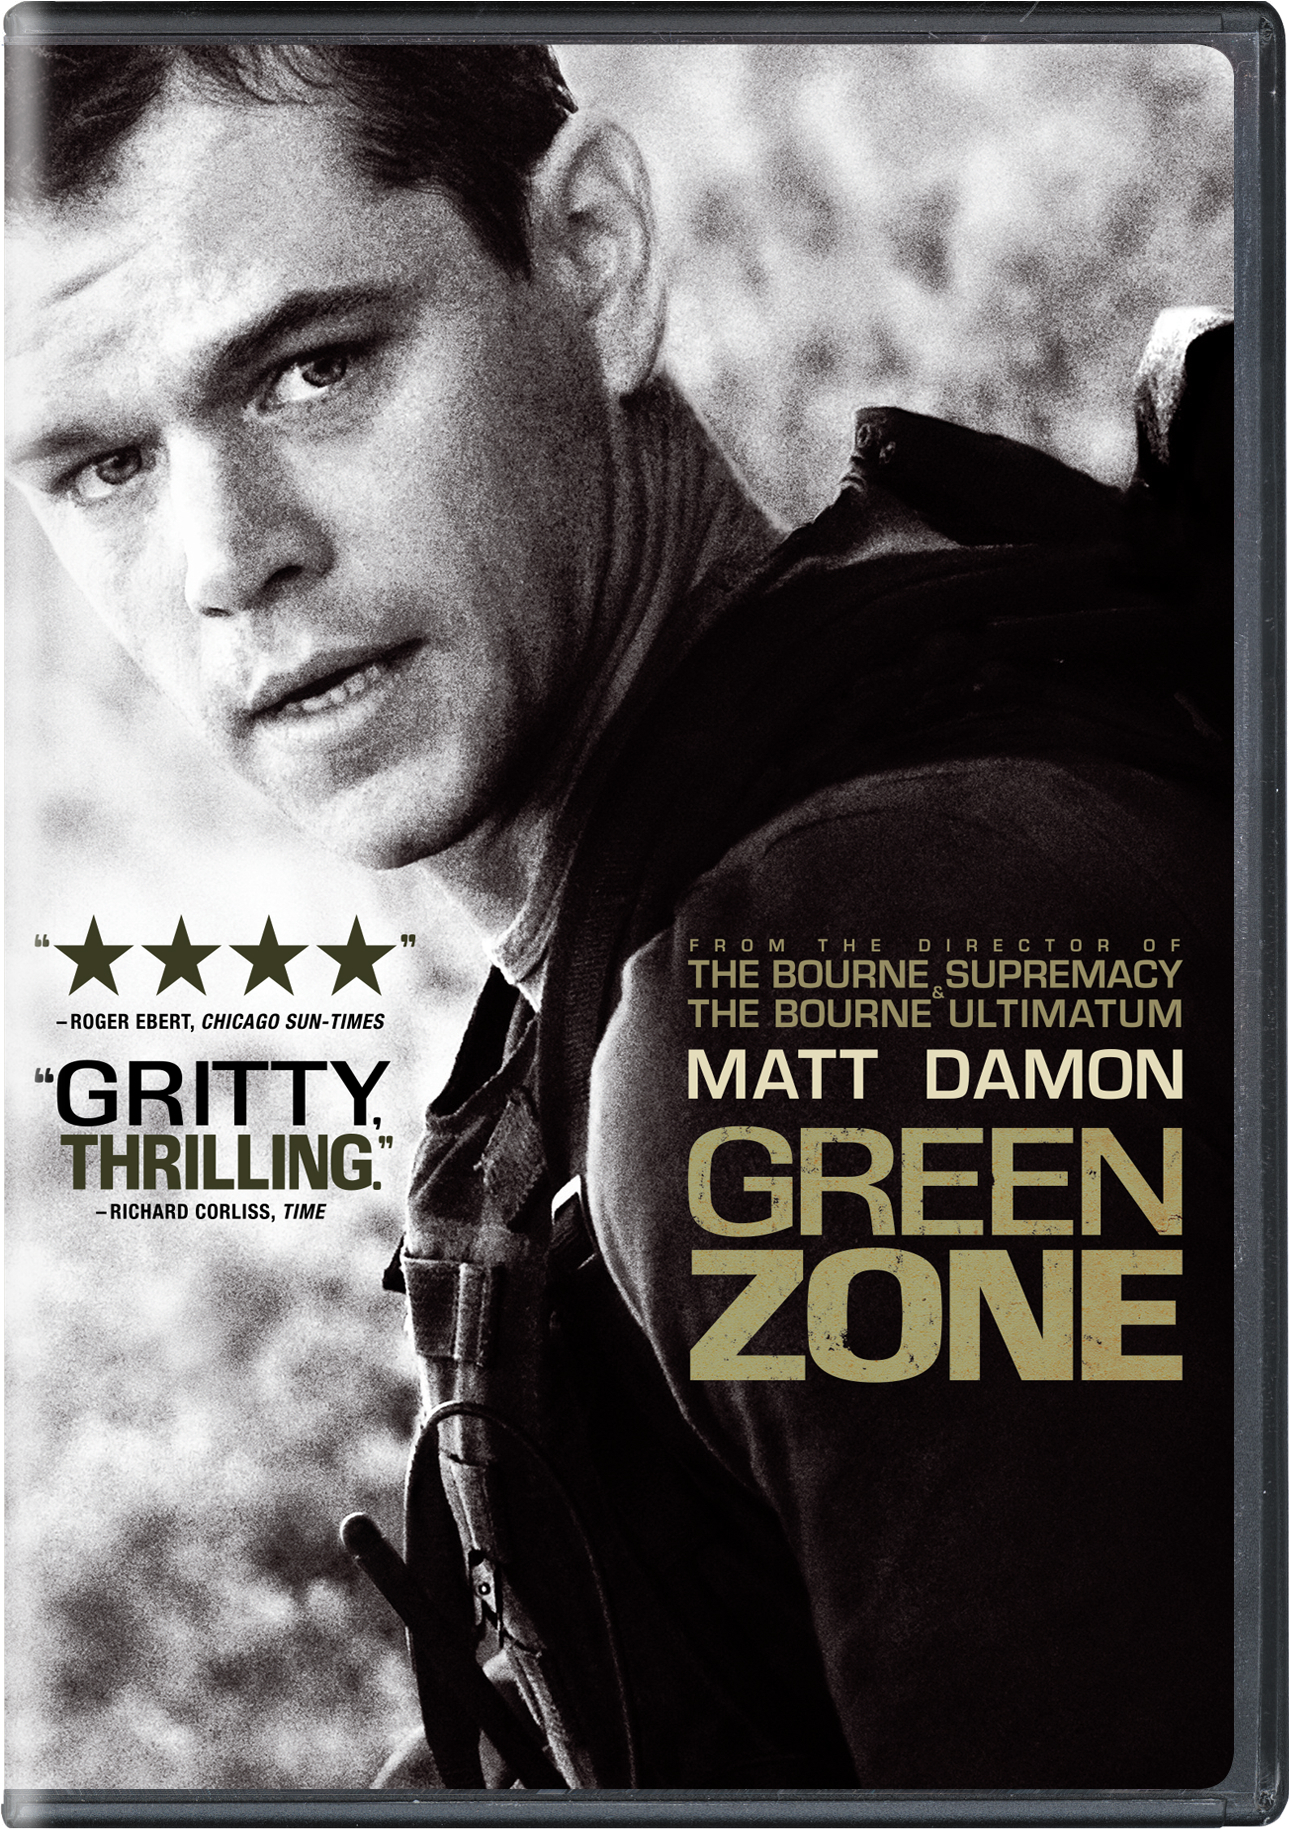 Green Zone (DVD Widescreen) - DVD [ 2010 ]  - War Movies On DVD - Movies On GRUV